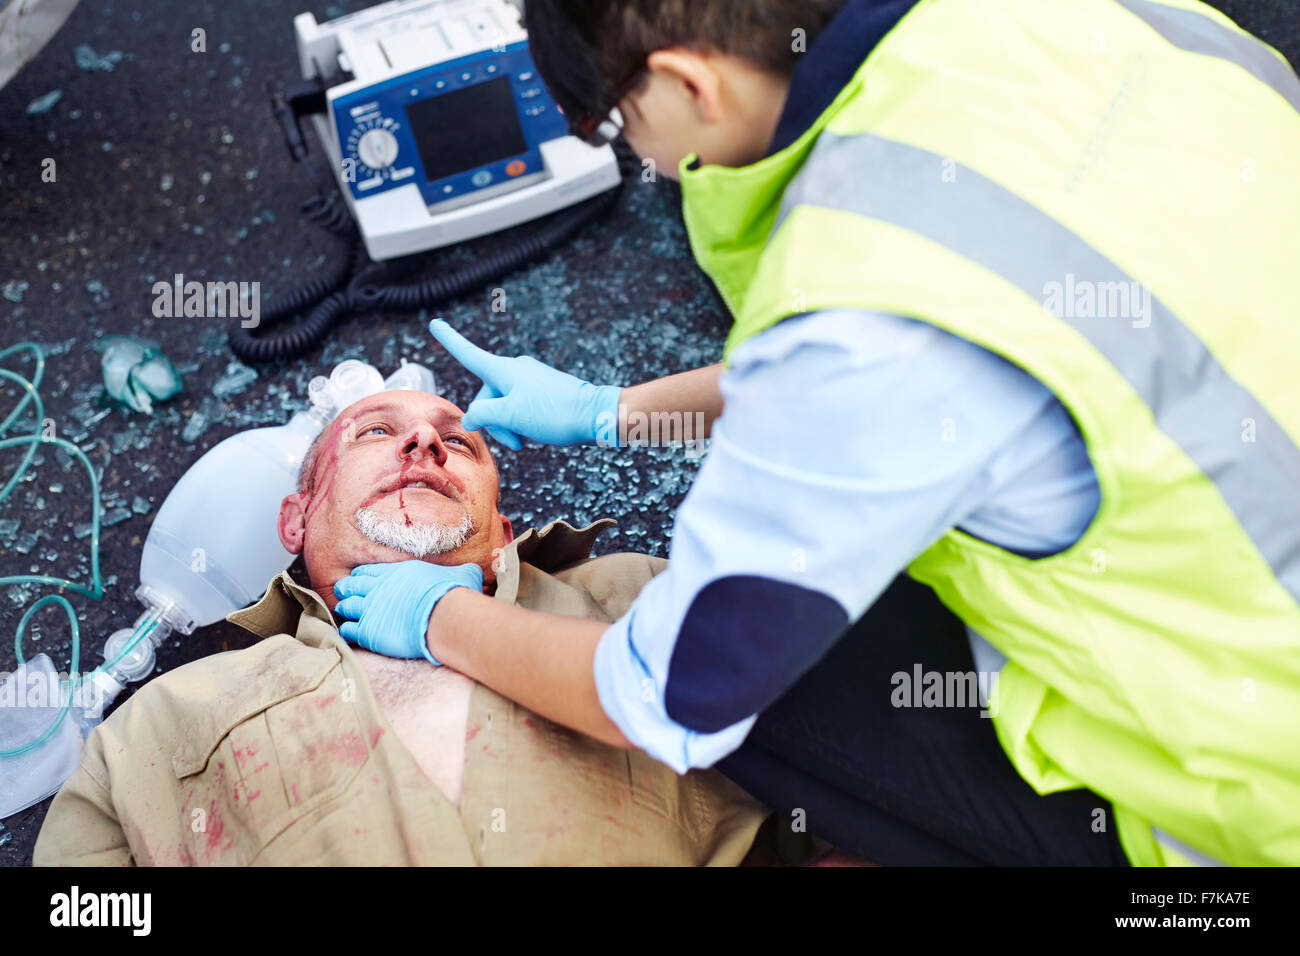 Rescue worker tending to car accident victim in road Stock Photo